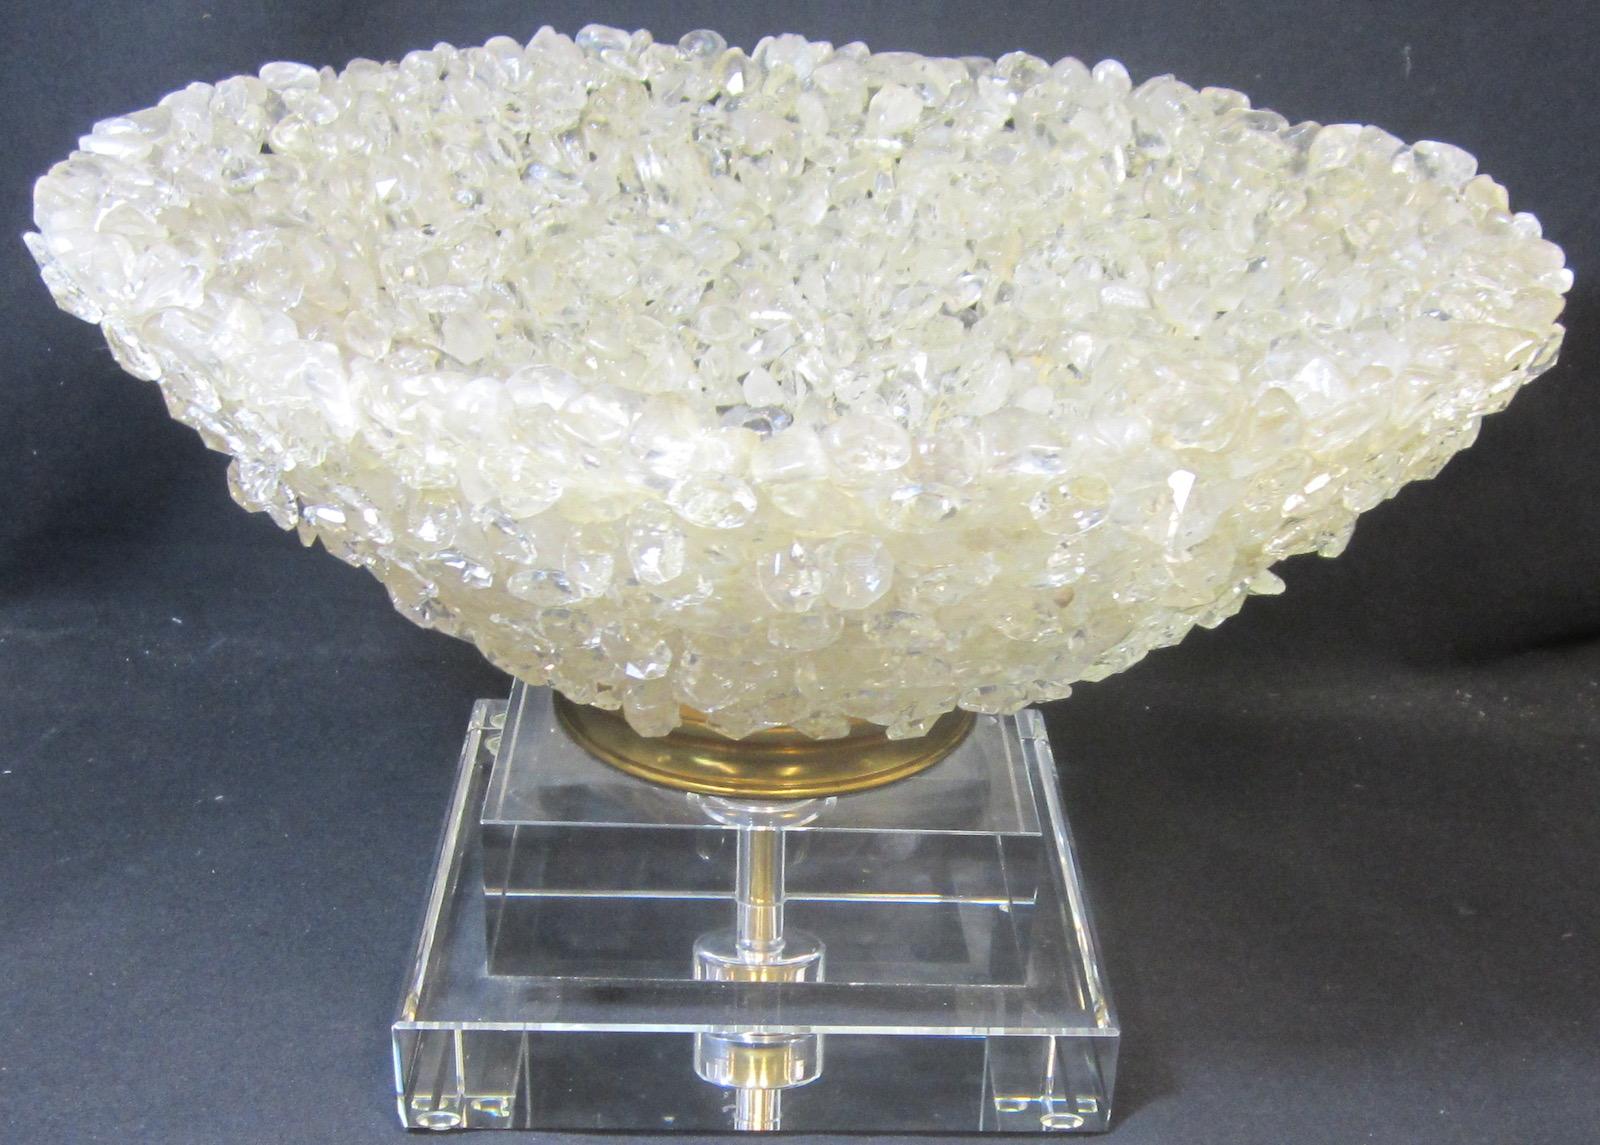 Rock crystal bowl on a glass base with decorative brass accents.
Our eclectic stock crosses cultures, continents, styles and famous names.
 